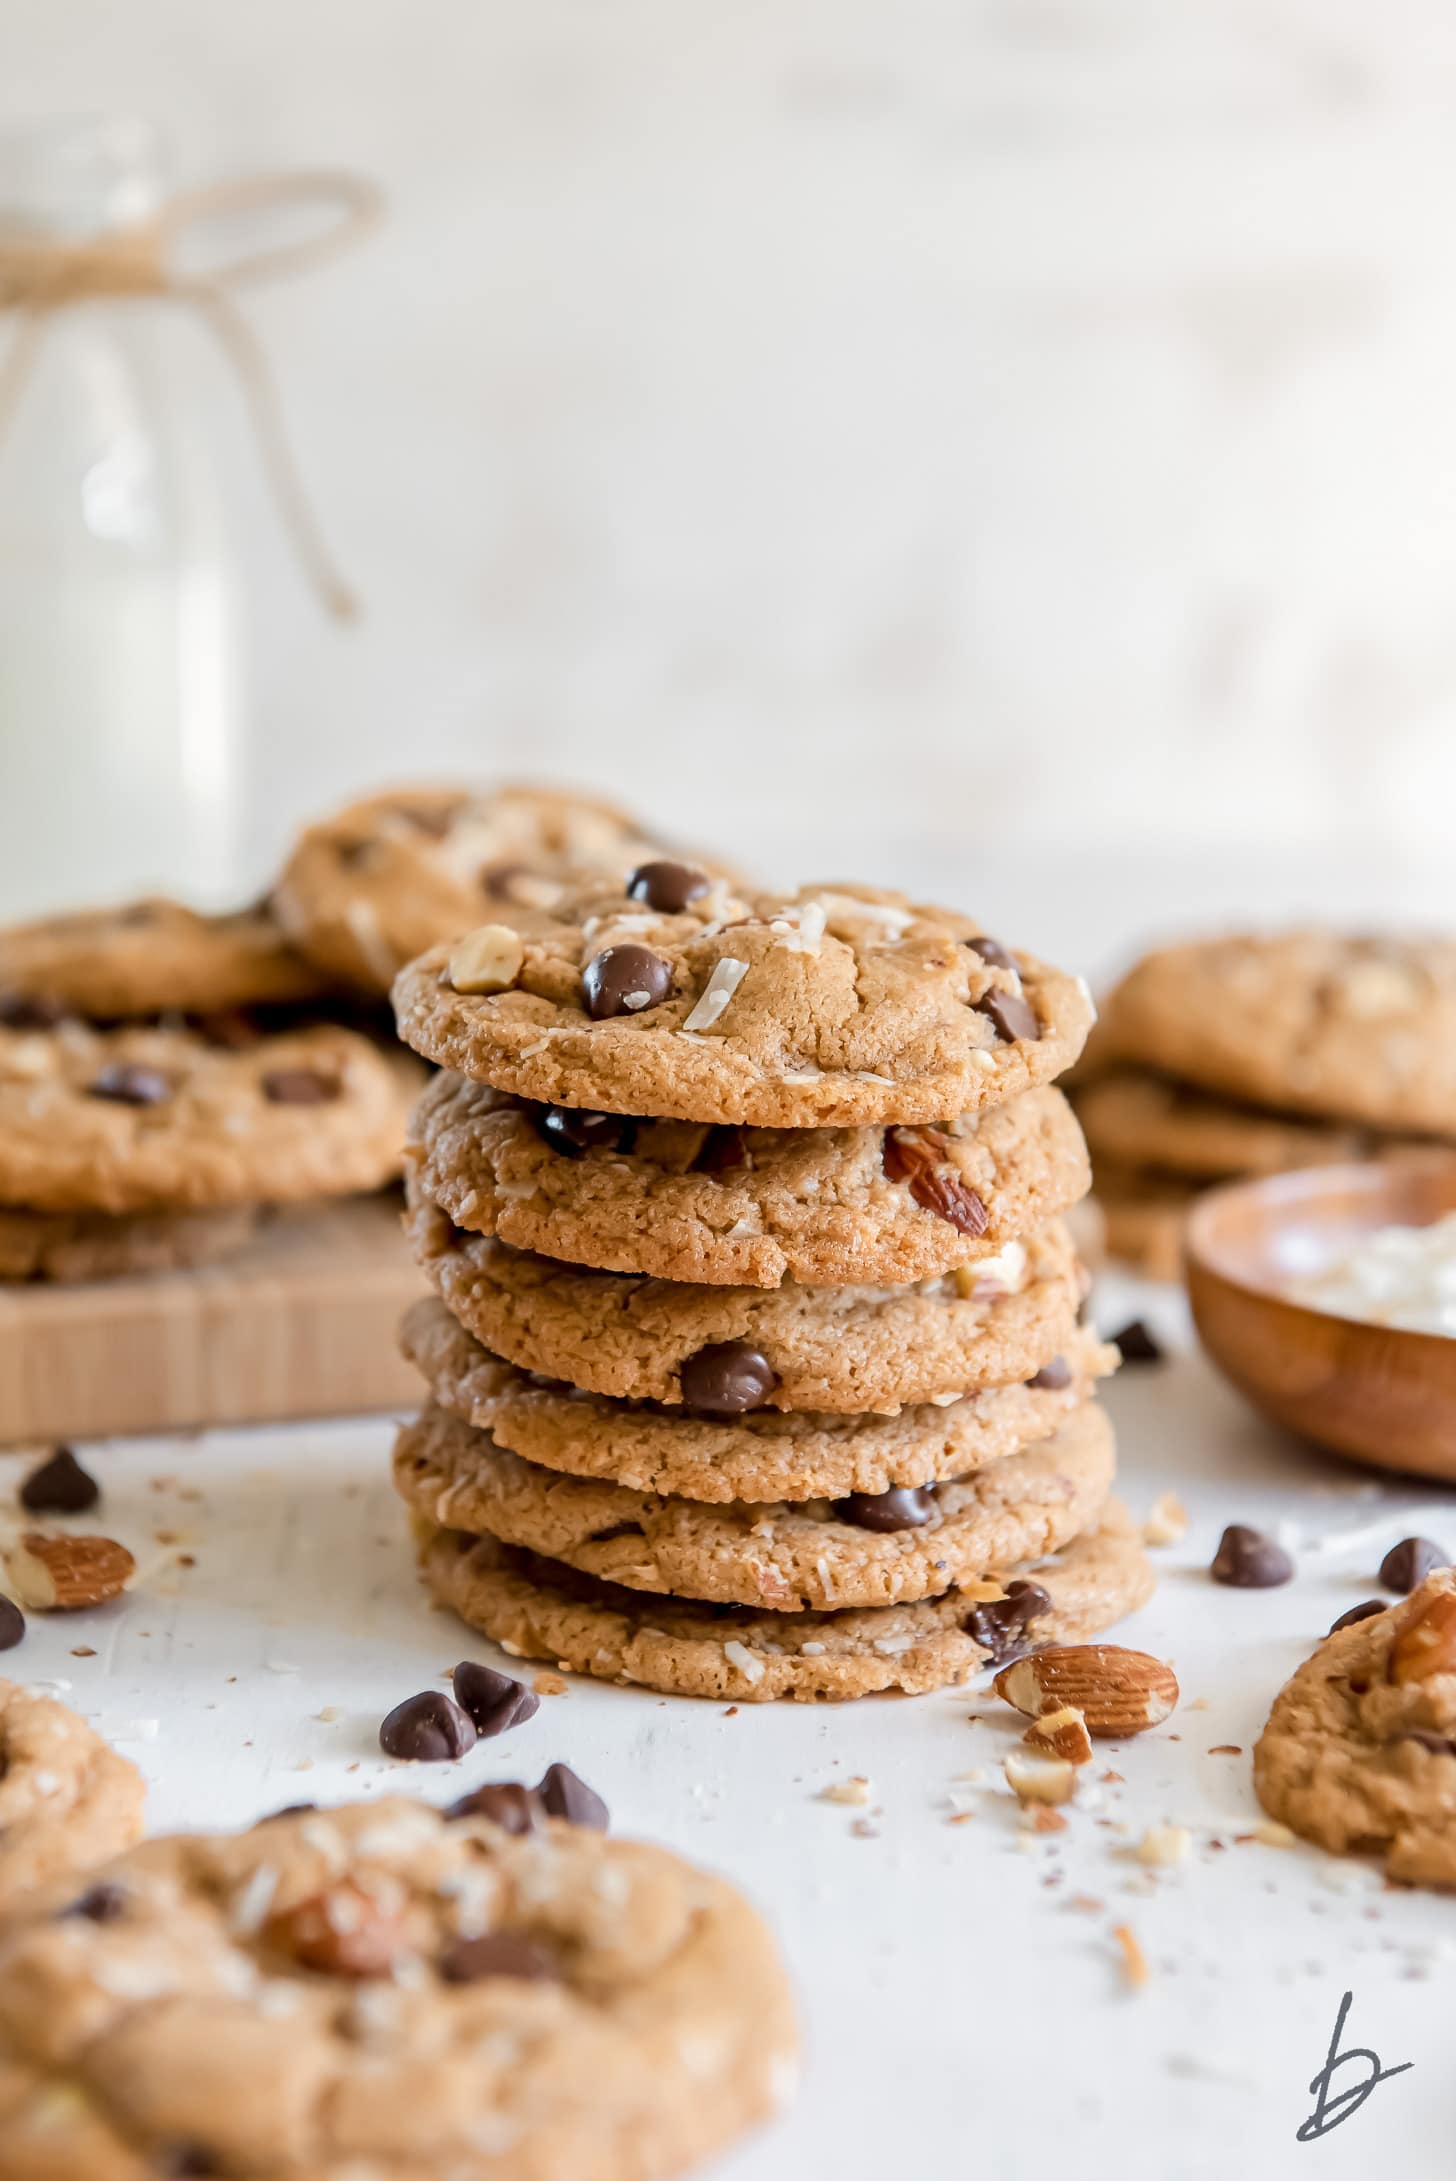 stack of six almond butter cookies with chocolate chips and shredded coconut.